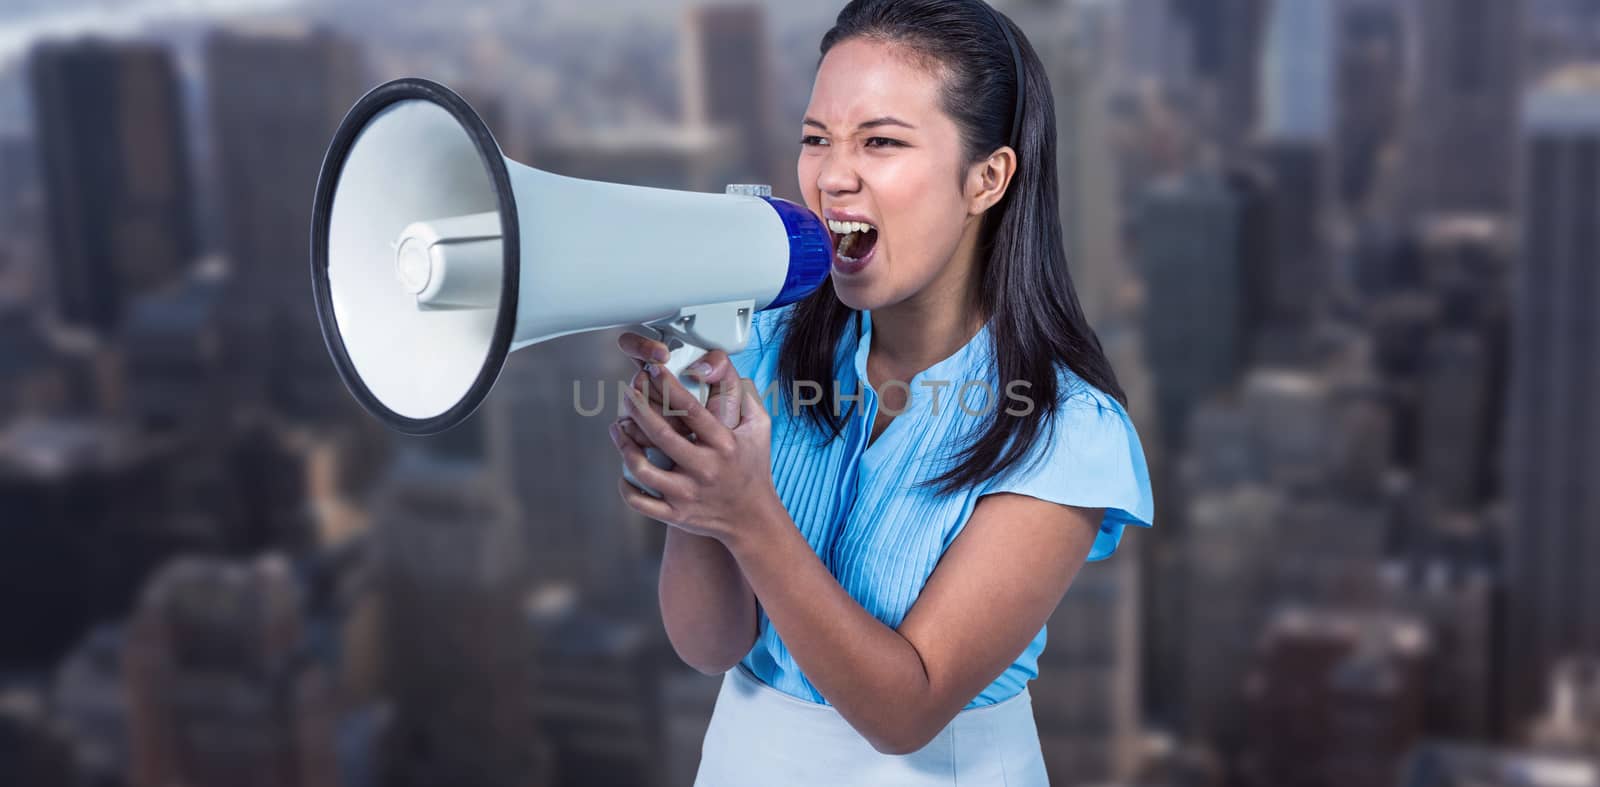 Businesswoman shouting into a megaphone against view of cityscape